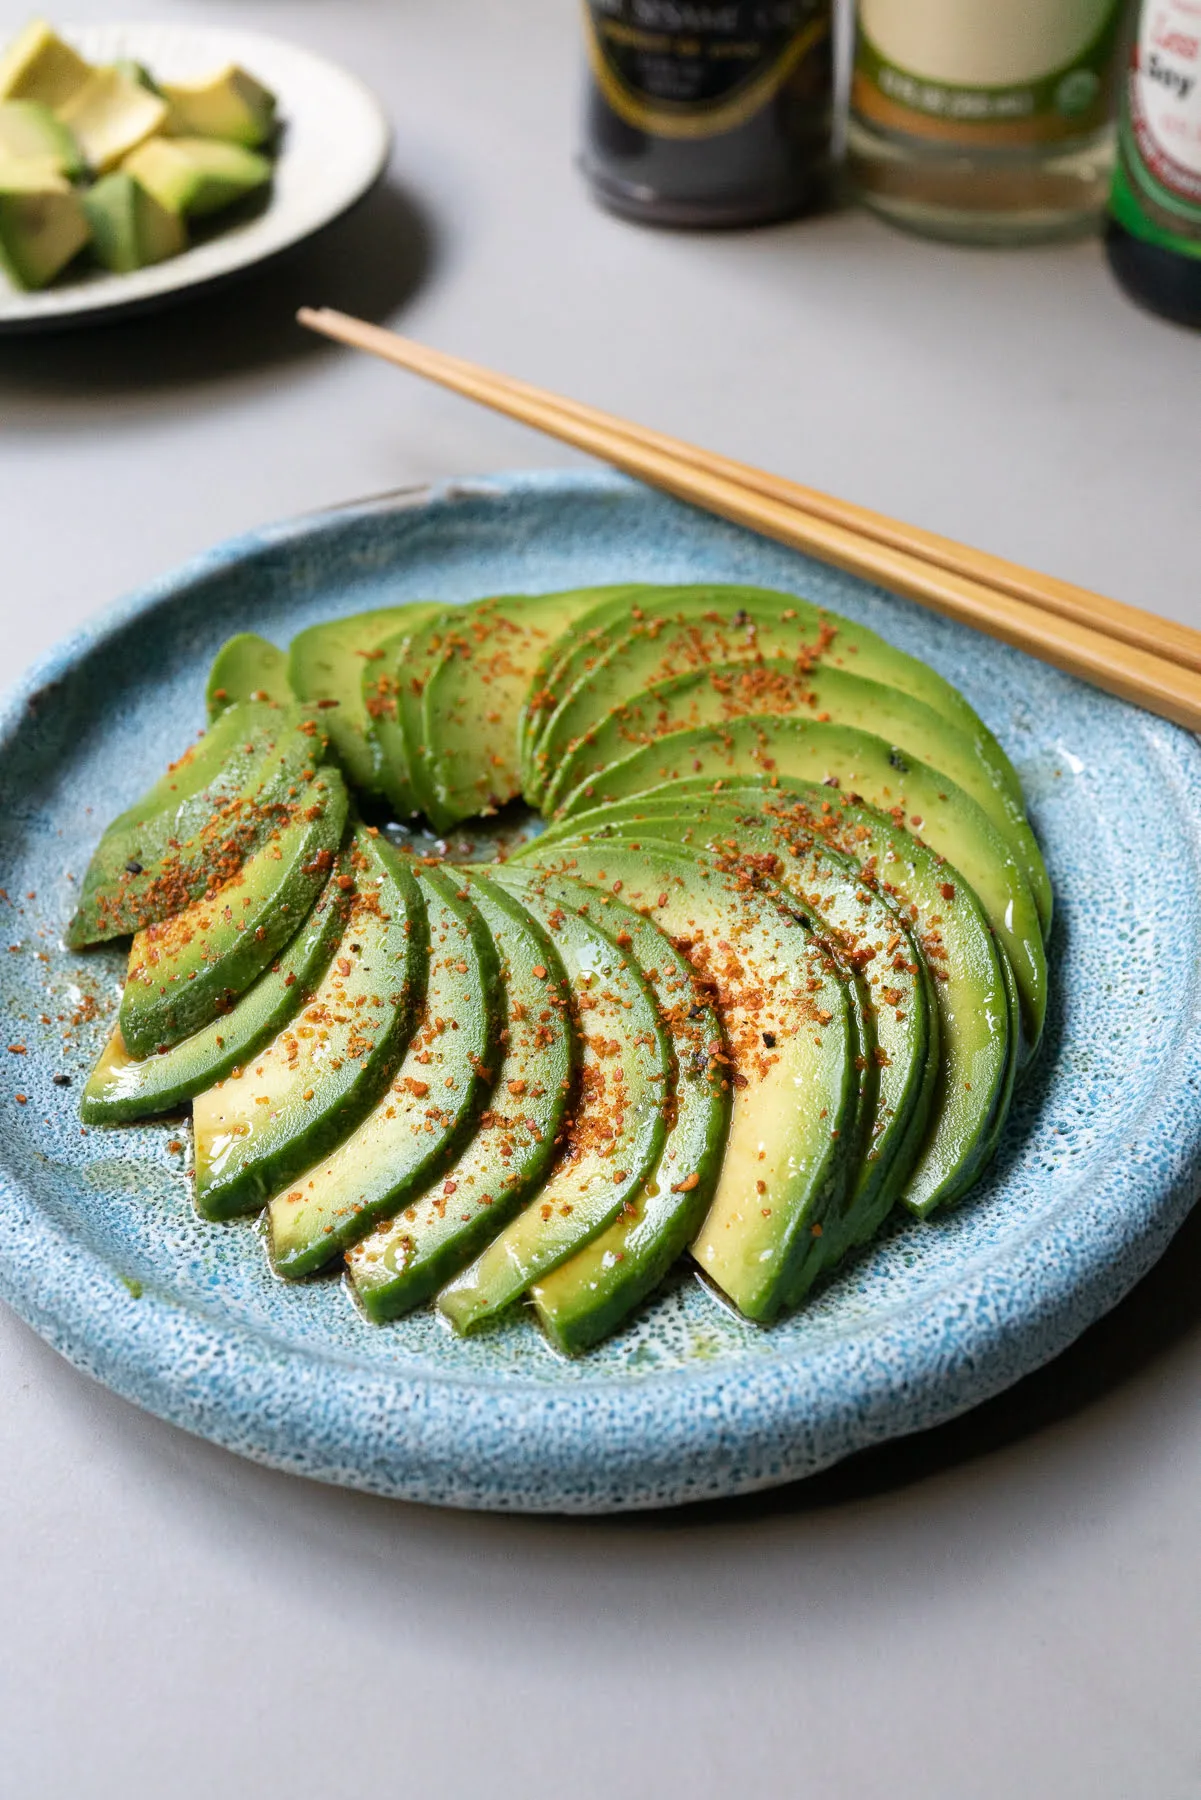 Japanese avocado salad on a plate, ready to eat.